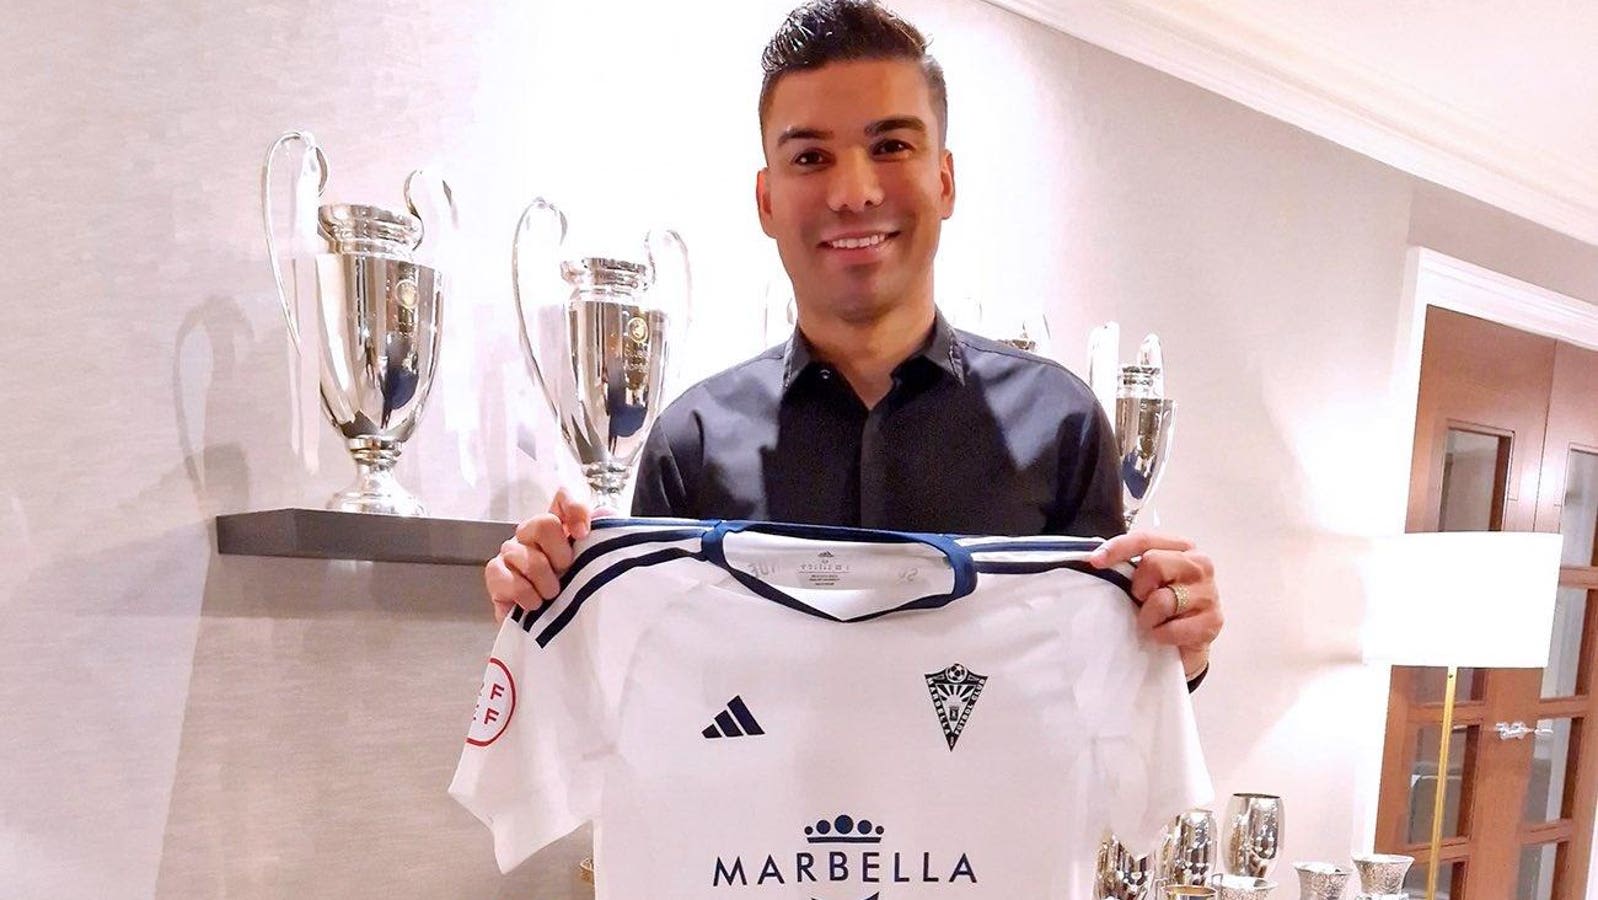 Real Madrid Legend And Manchester United Star Casemiro ‘Joins Marbella FC’